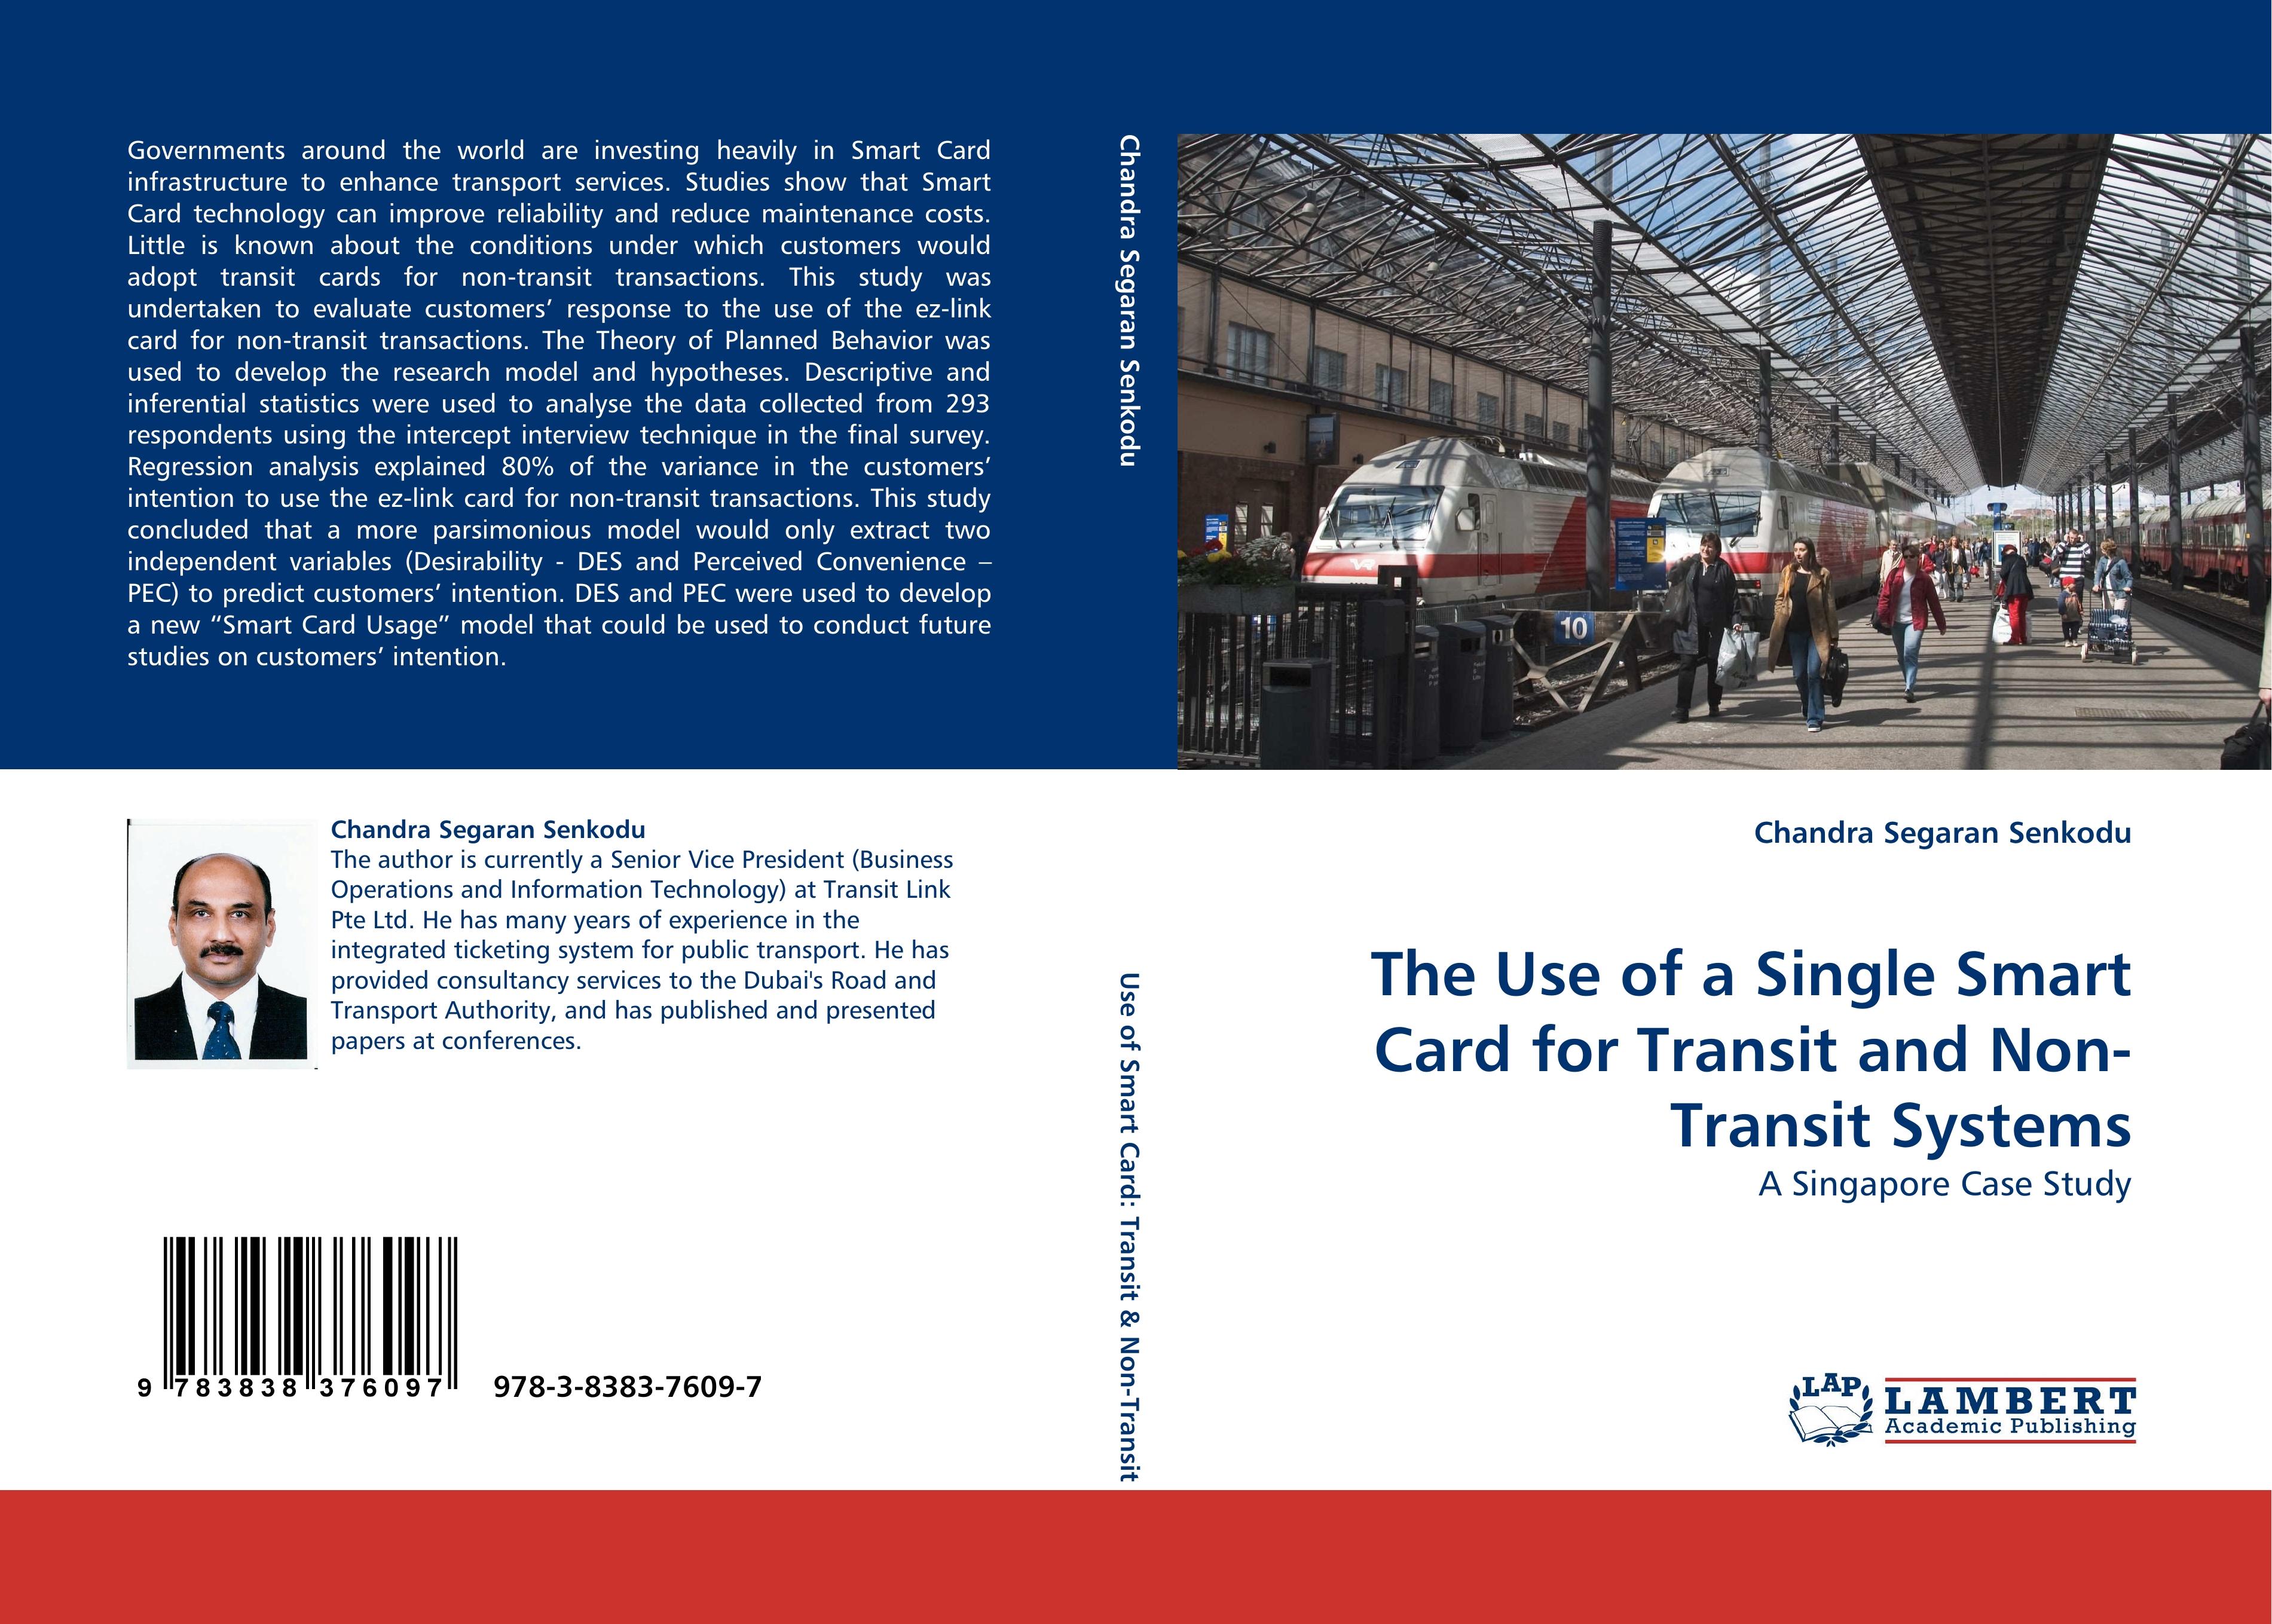 The Use of a Single Smart Card for Transit and Non-Transit Systems | A SINGAPORE CASE STUDY | Chandra Segaran Senkodu | Taschenbuch | Paperback | 196 S. | Englisch | 2010 | EAN 9783838376097 - Senkodu, Chandra Segaran